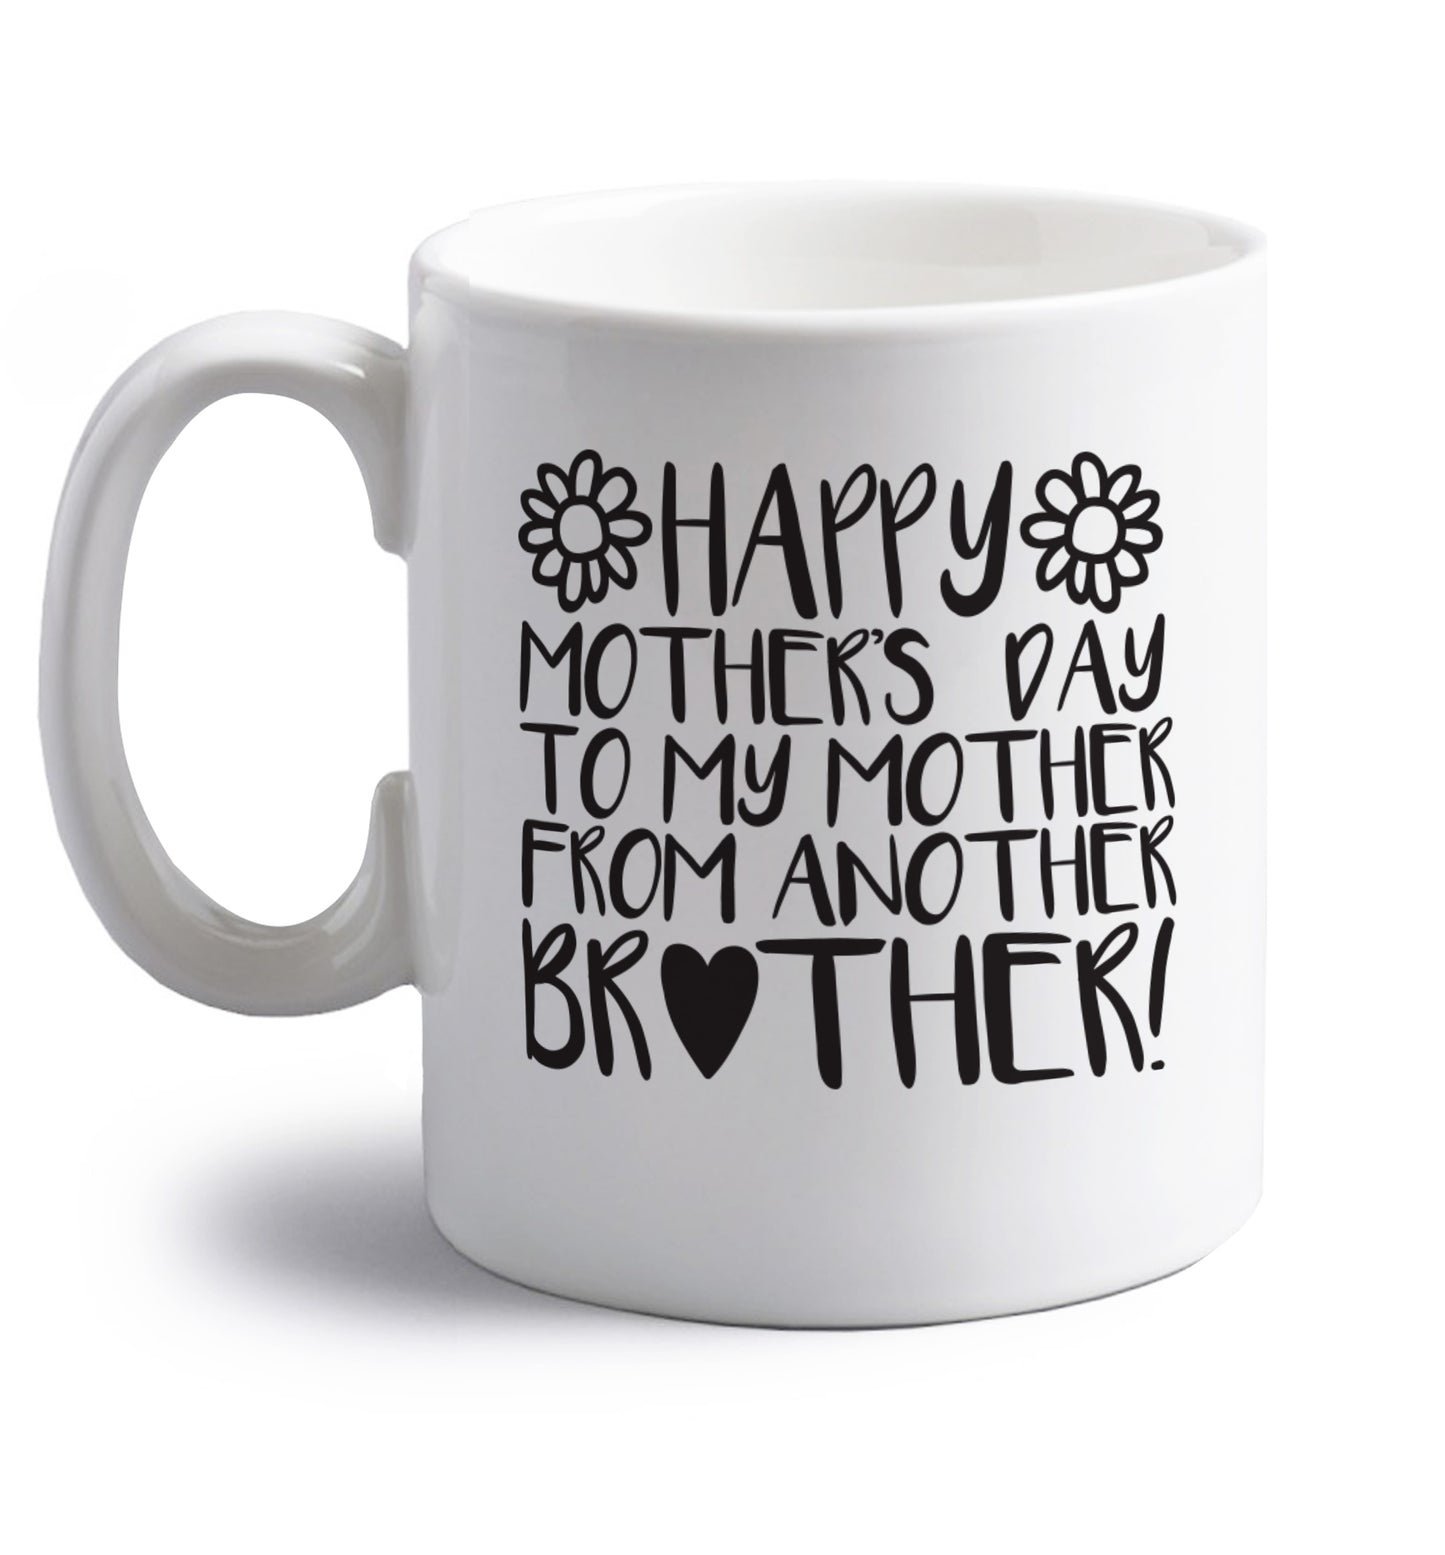 Happy mother's day to my mother from another brother right handed white ceramic mug 